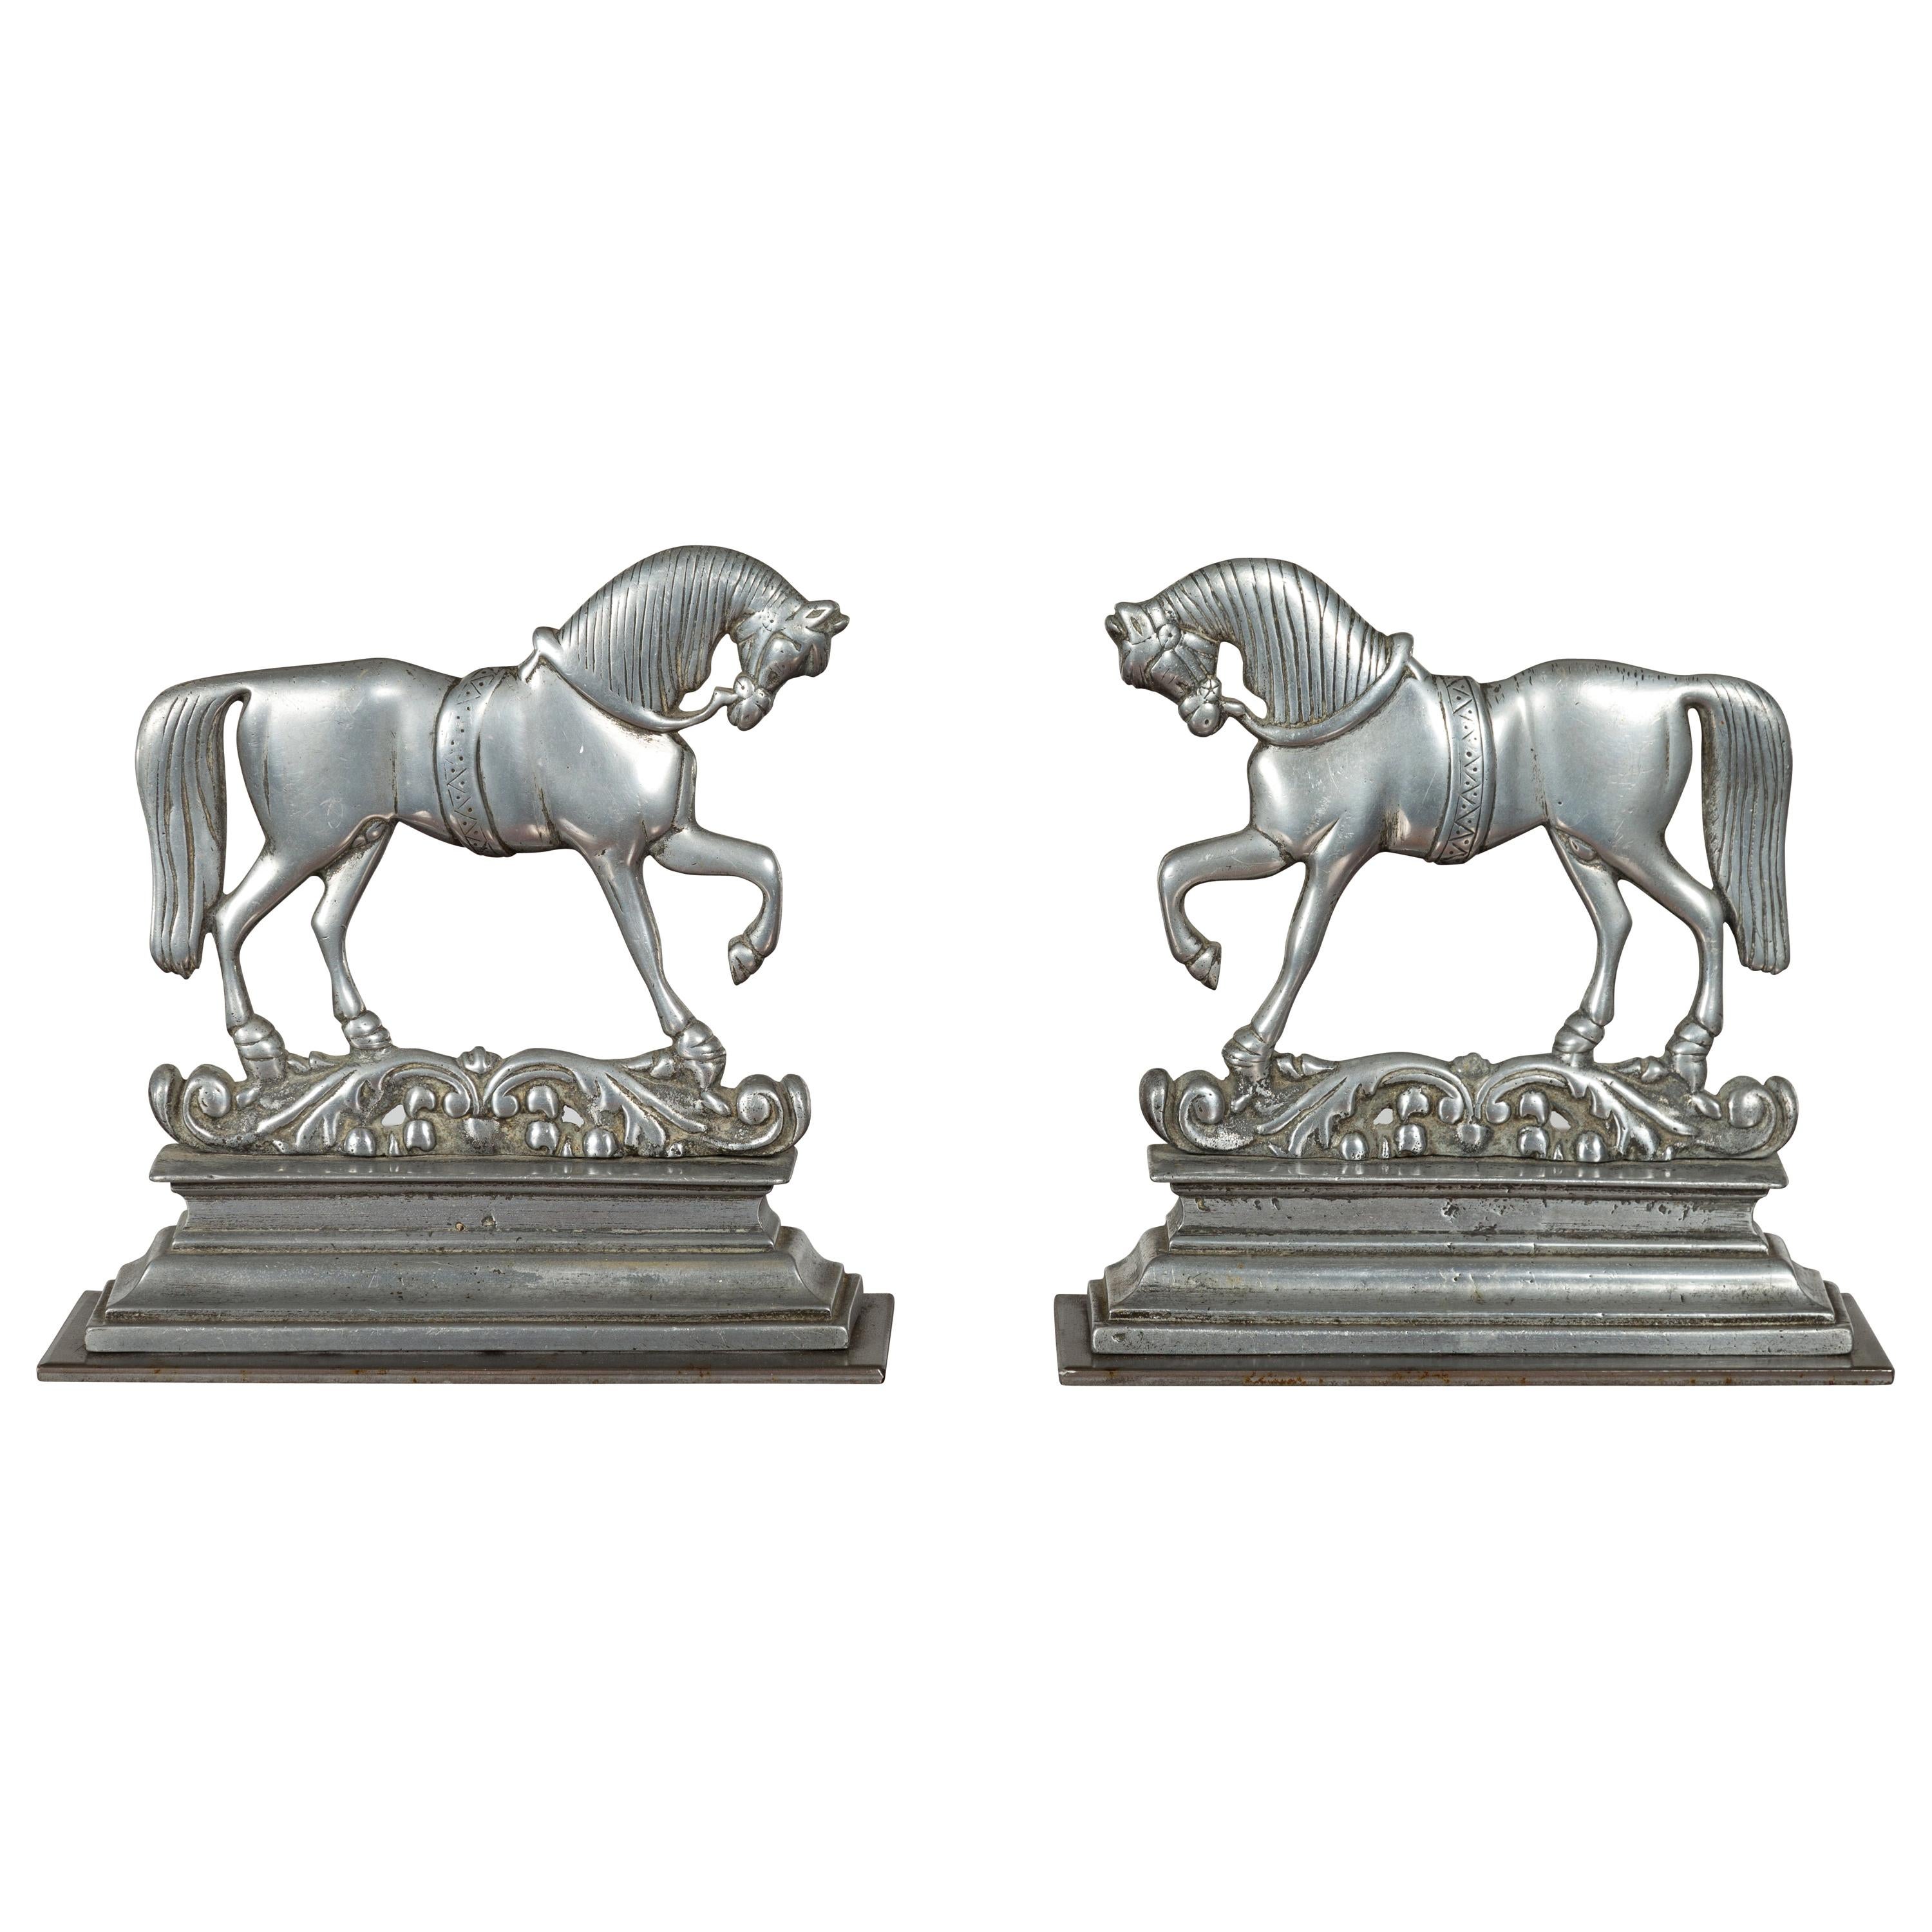 Pair of English Turn of the Century Metal Bookends Depicting Prancing Horses For Sale